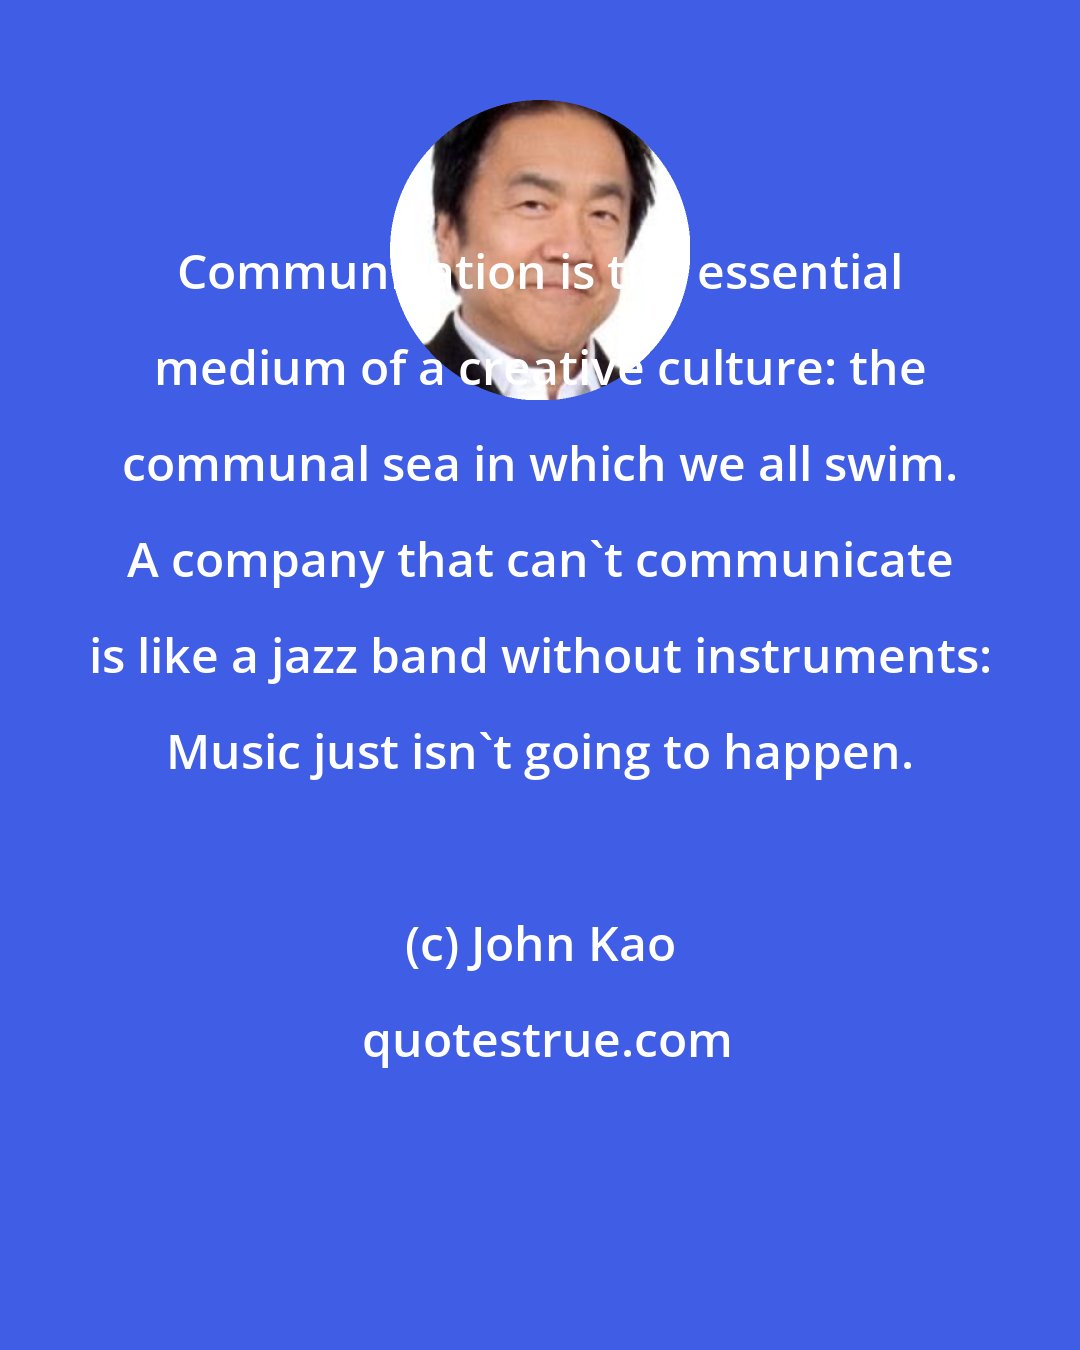 John Kao: Communication is the essential medium of a creative culture: the communal sea in which we all swim. A company that can't communicate is like a jazz band without instruments: Music just isn't going to happen.